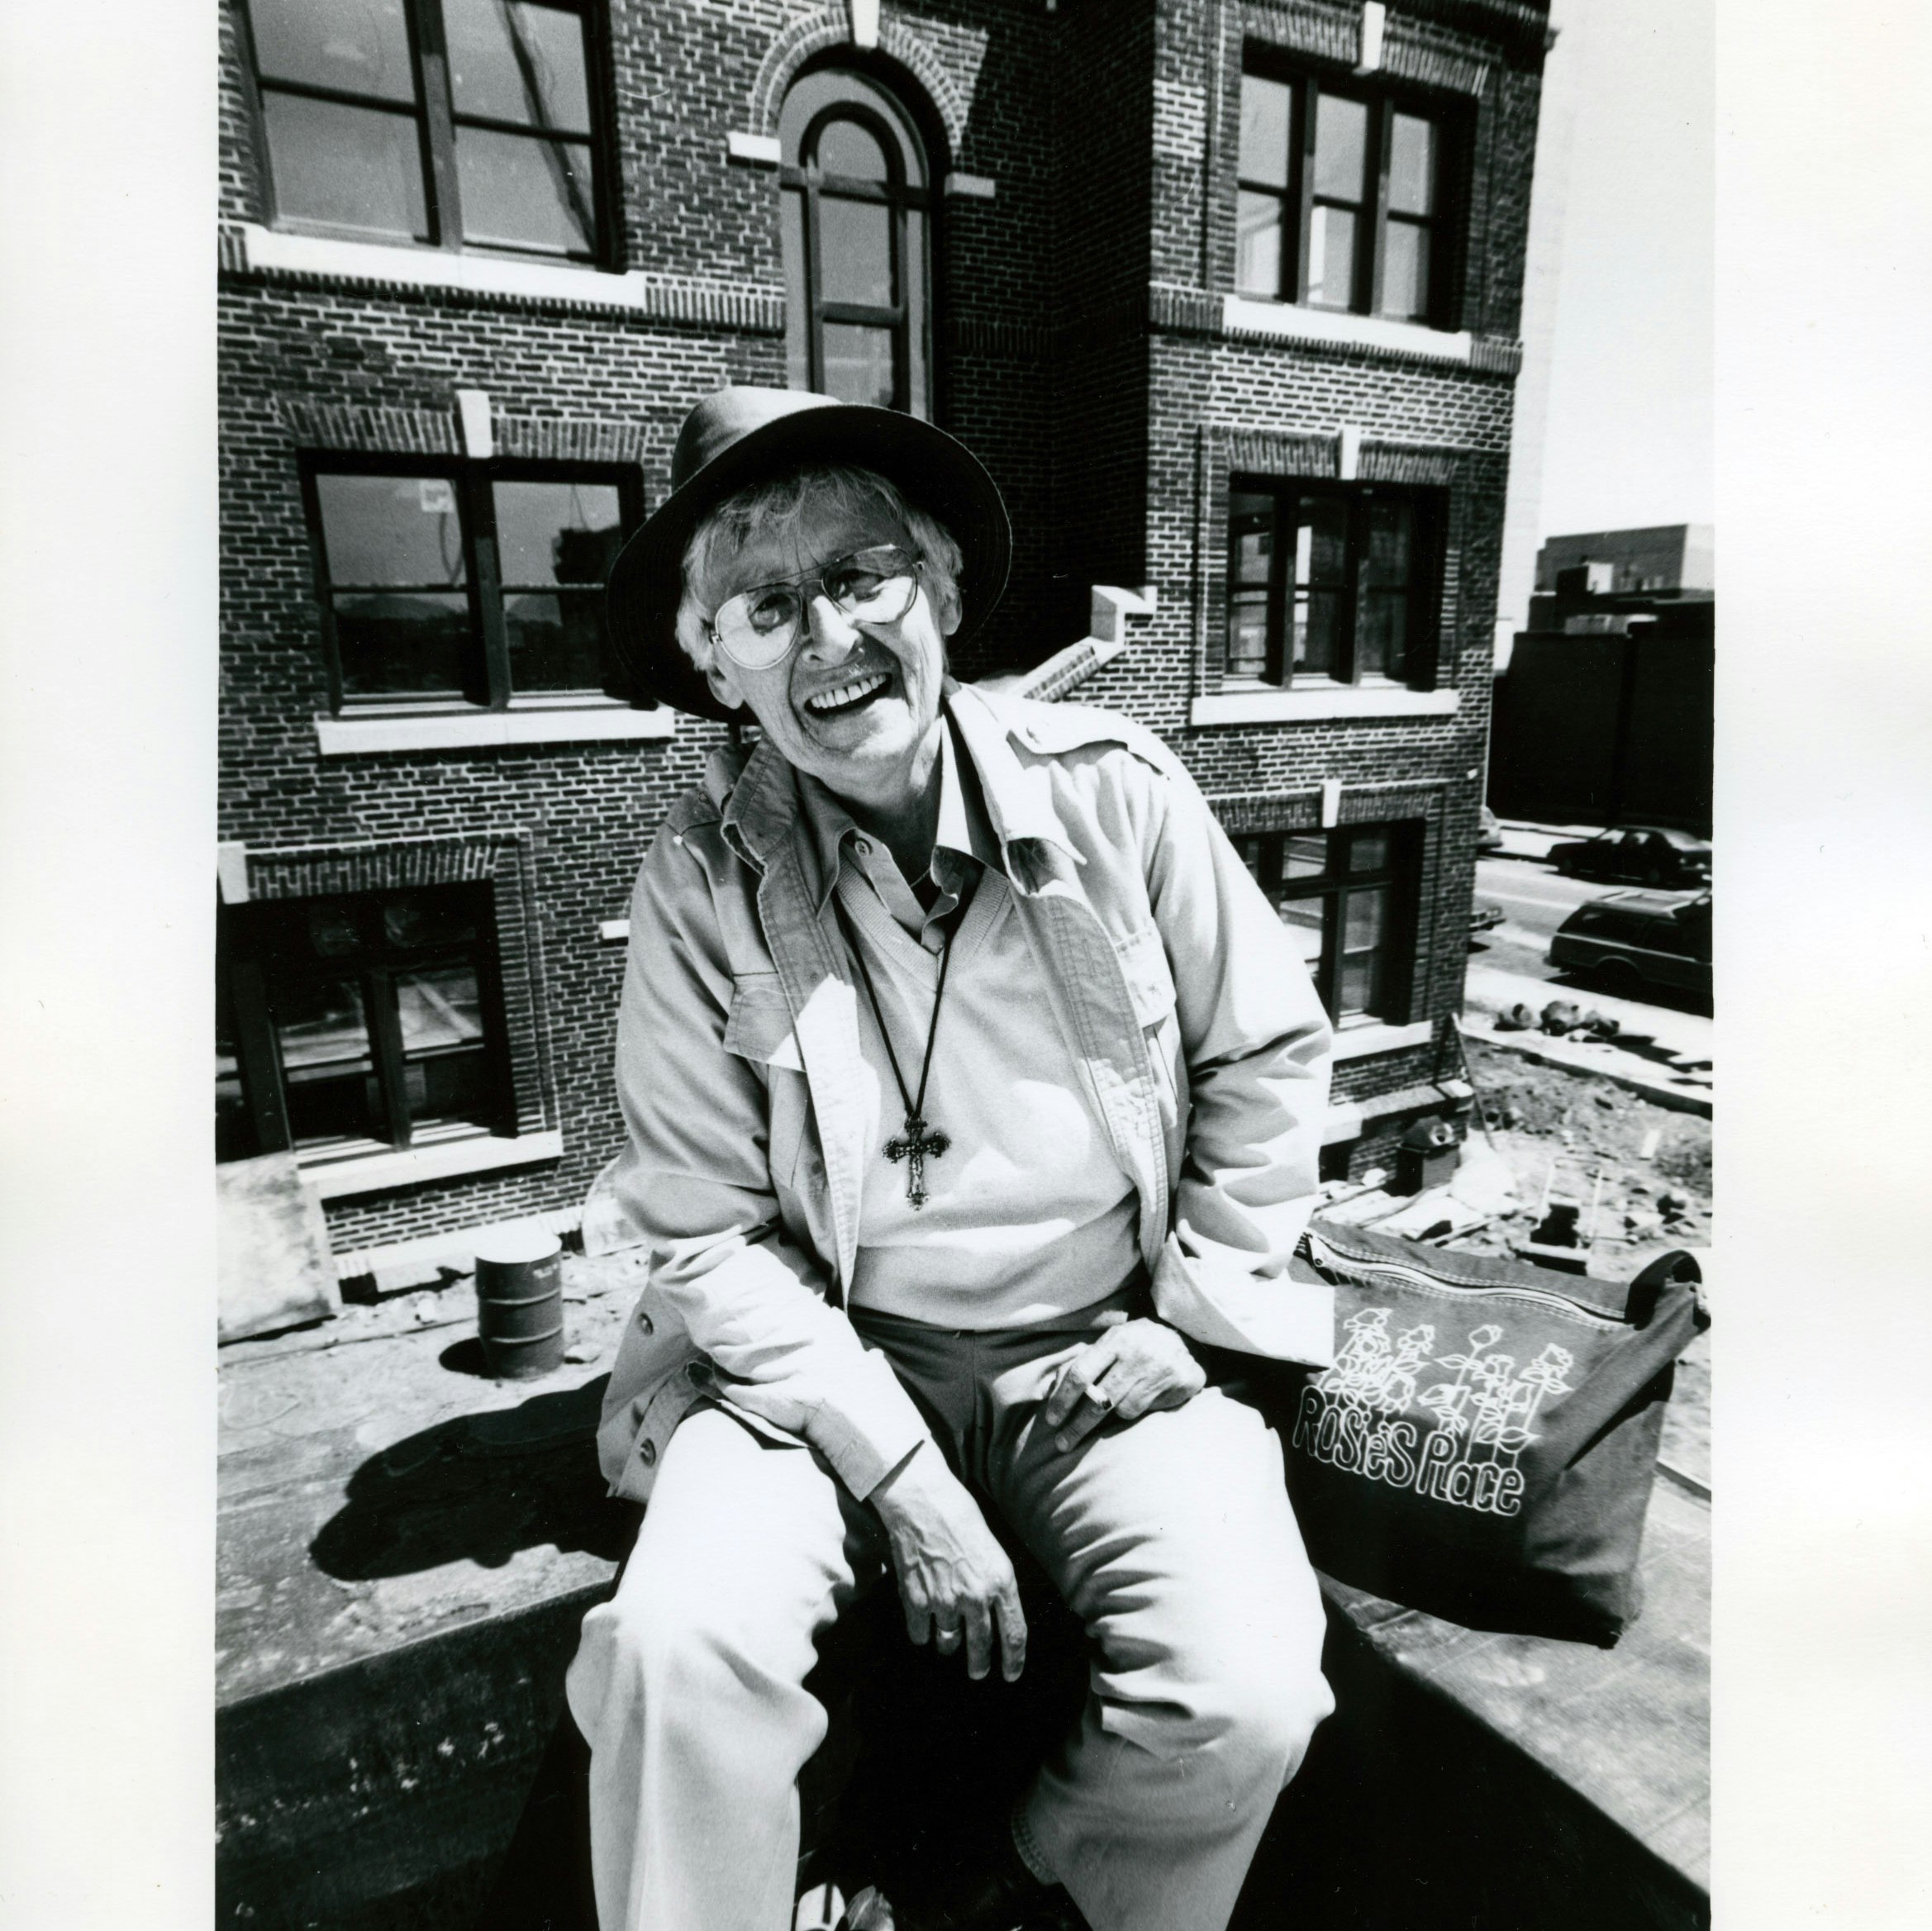 Kip Tierman smiling, and seated outdoors on a rooftop, ca. 1991.